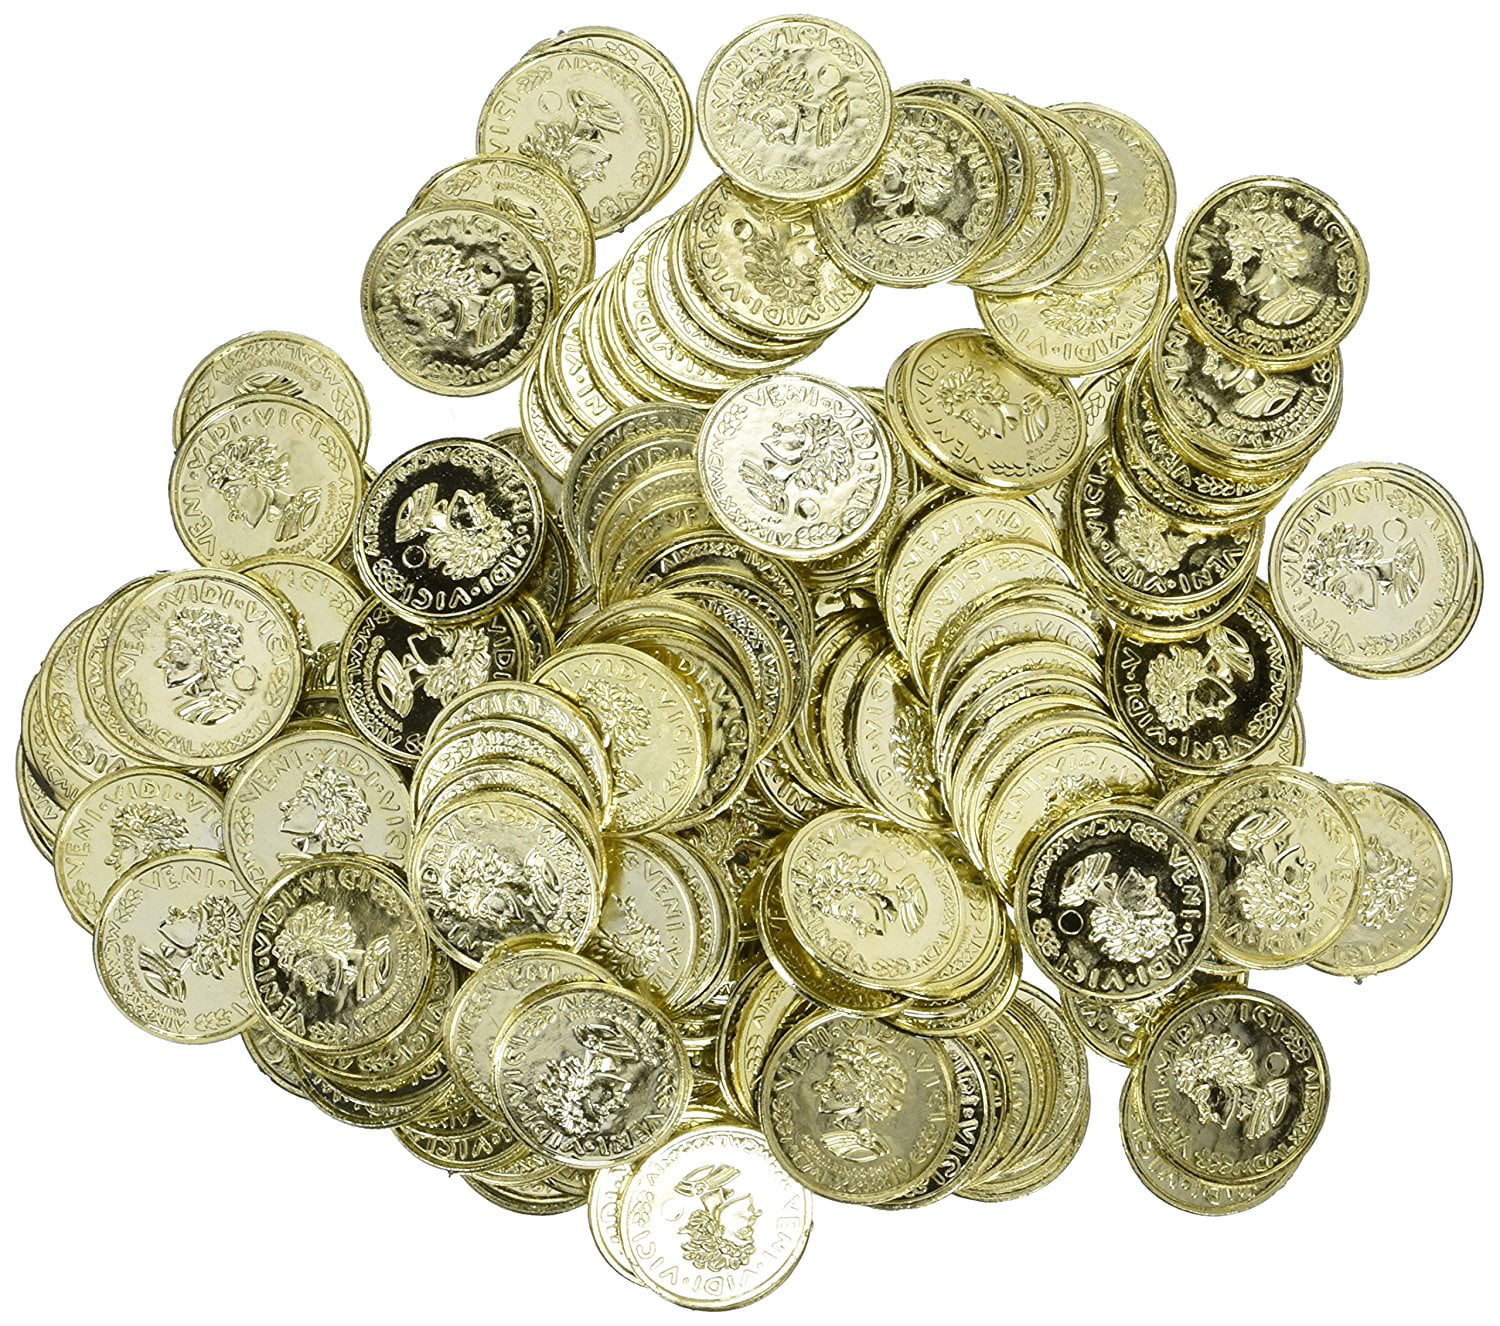 1000 PLASTIC GOLD COINS PIRATE TREASURE CHEST PLAY MONEY BIRTHDAY PARTY FAVORS 